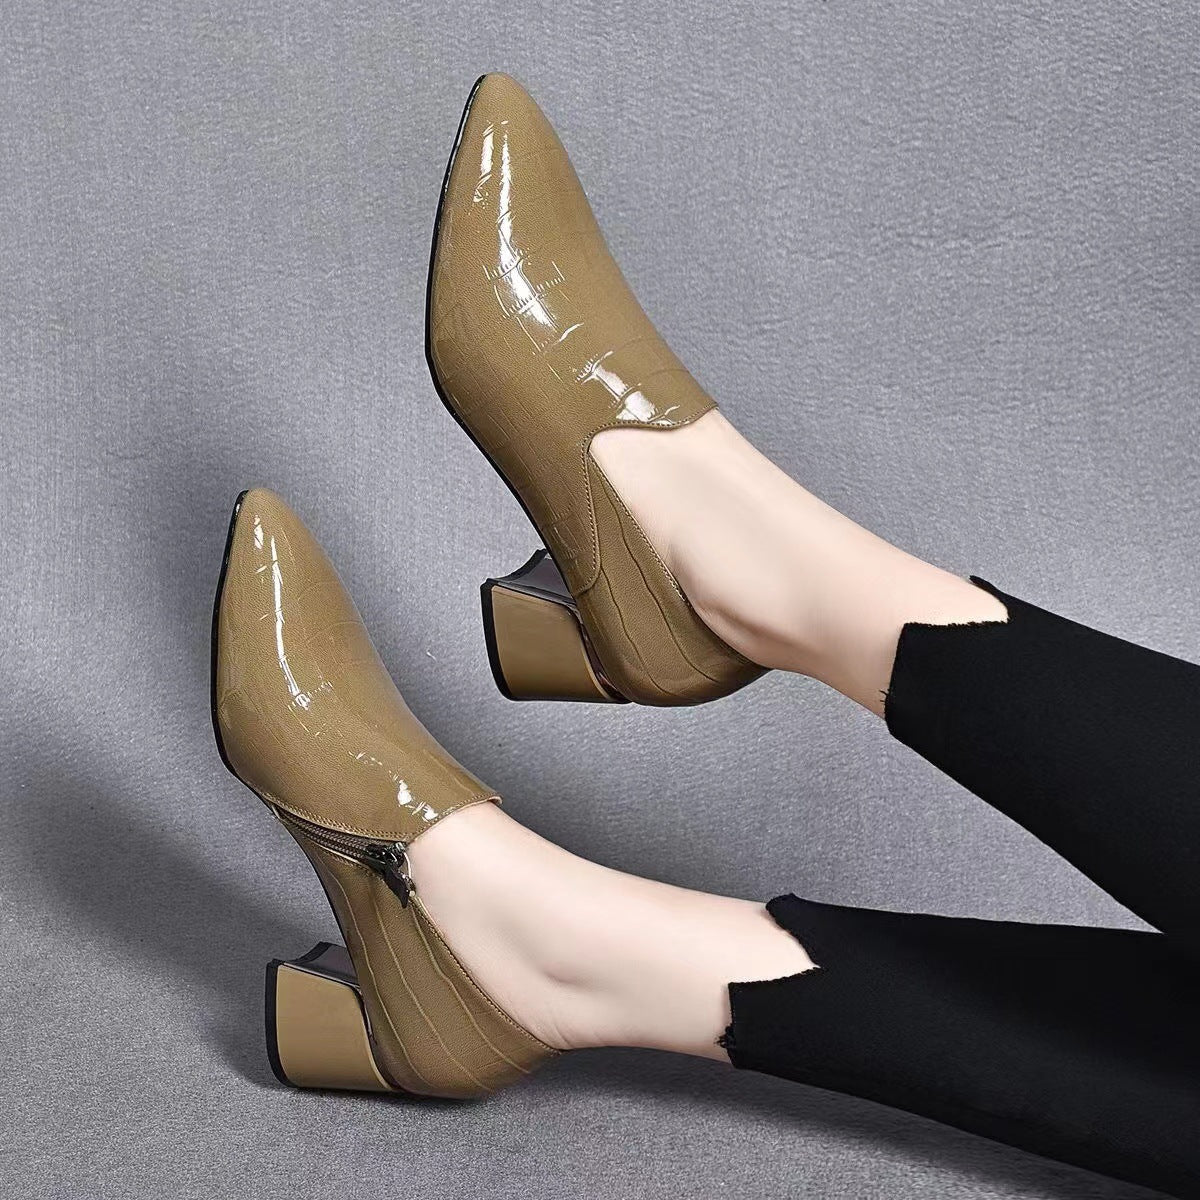 Women's Patent Deep Mouth Pointed Toe Chunky Women's Shoes